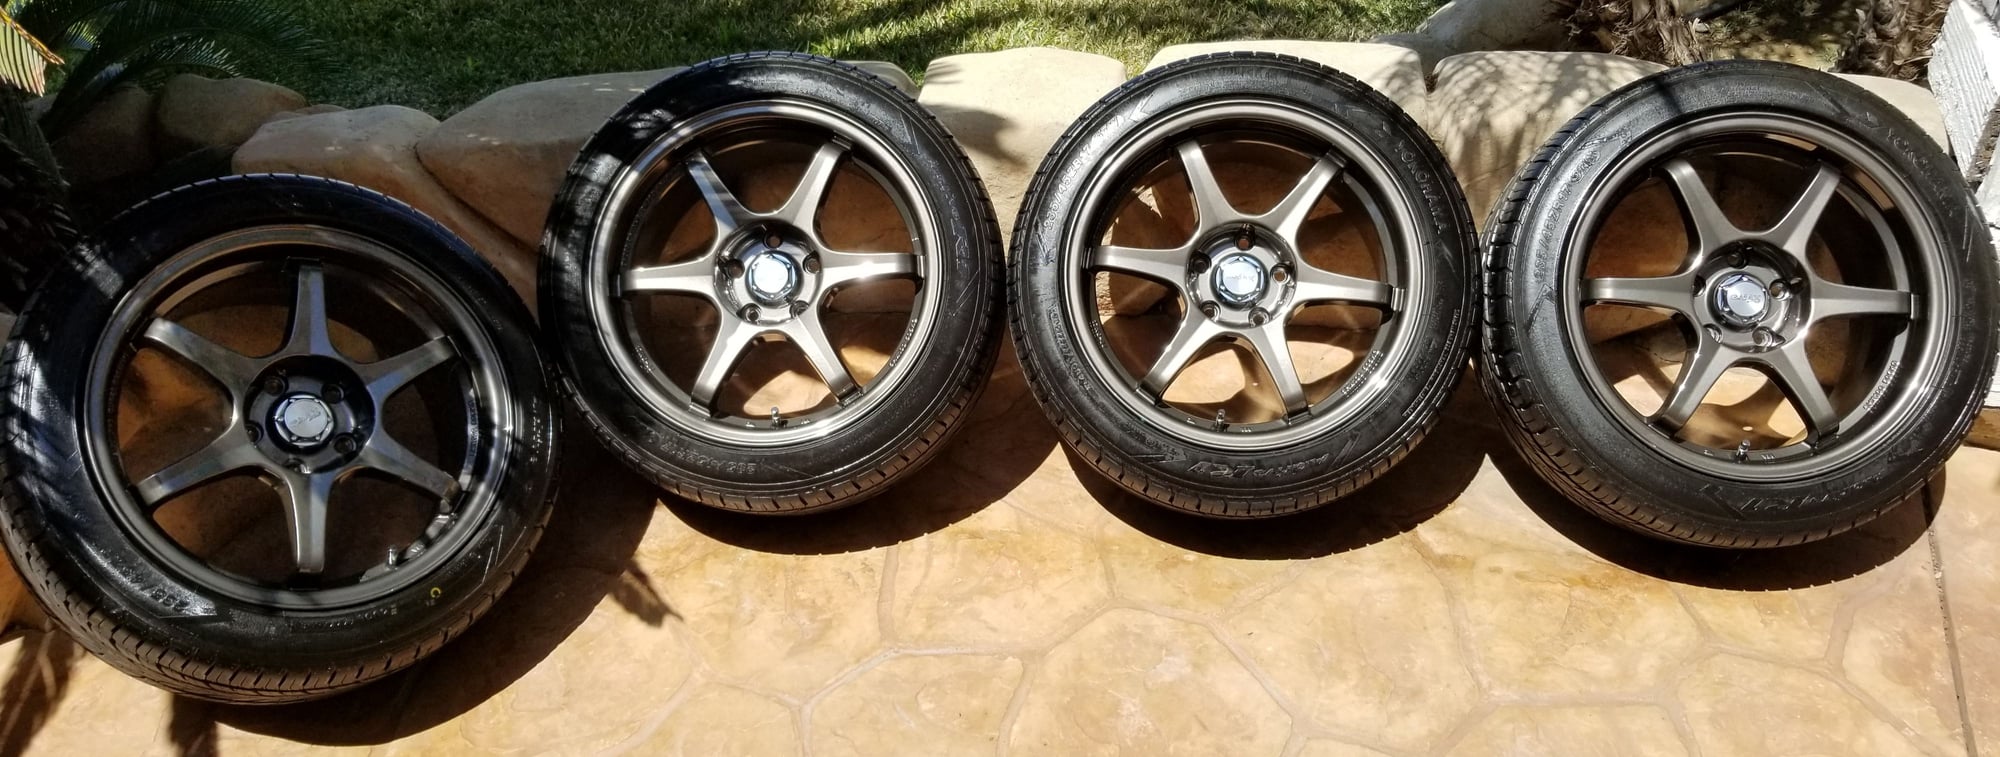 Wheels and Tires/Axles - G.MAX Drift 6 Wheels & Tires Brand New - New - 1998 to 2005 Lexus GS300 - 1998 to 2000 Lexus GS400 - 2001 to 2005 Lexus GS430 - 2001 to 2005 Lexus IS300 - 1993 to 1997 Lexus GS300 - 1990 to 2000 Lexus LS400 - 1991 to 2001 Lexus ES300 - San Marcos, CA 92078, United States